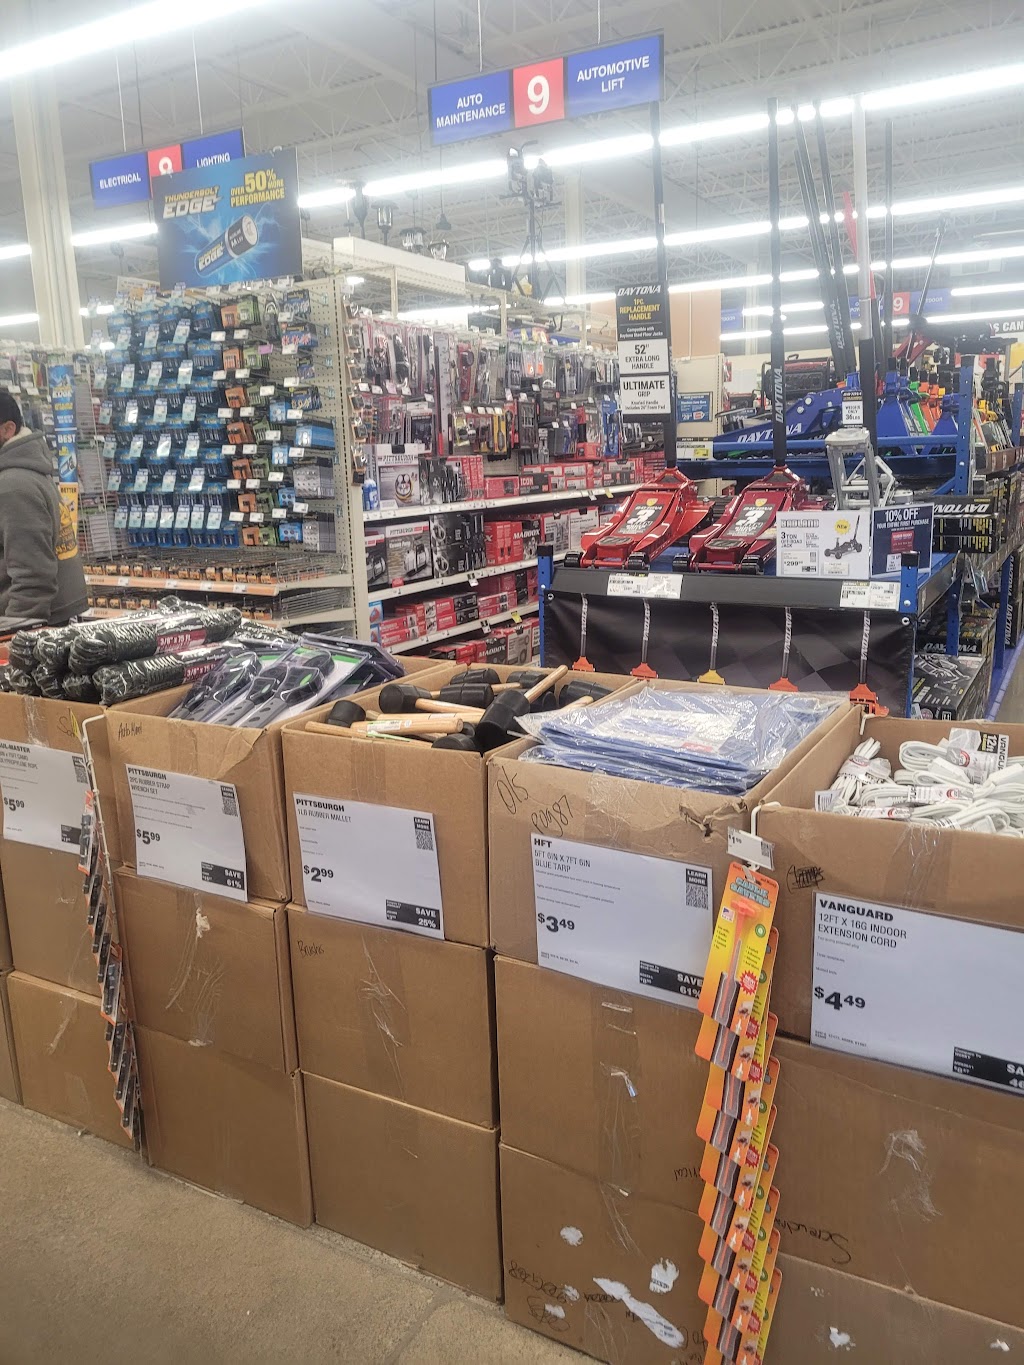 Harbor Freight Tools | 102 Milford Landing Dr, Milford, PA 18337 | Phone: (570) 491-6565